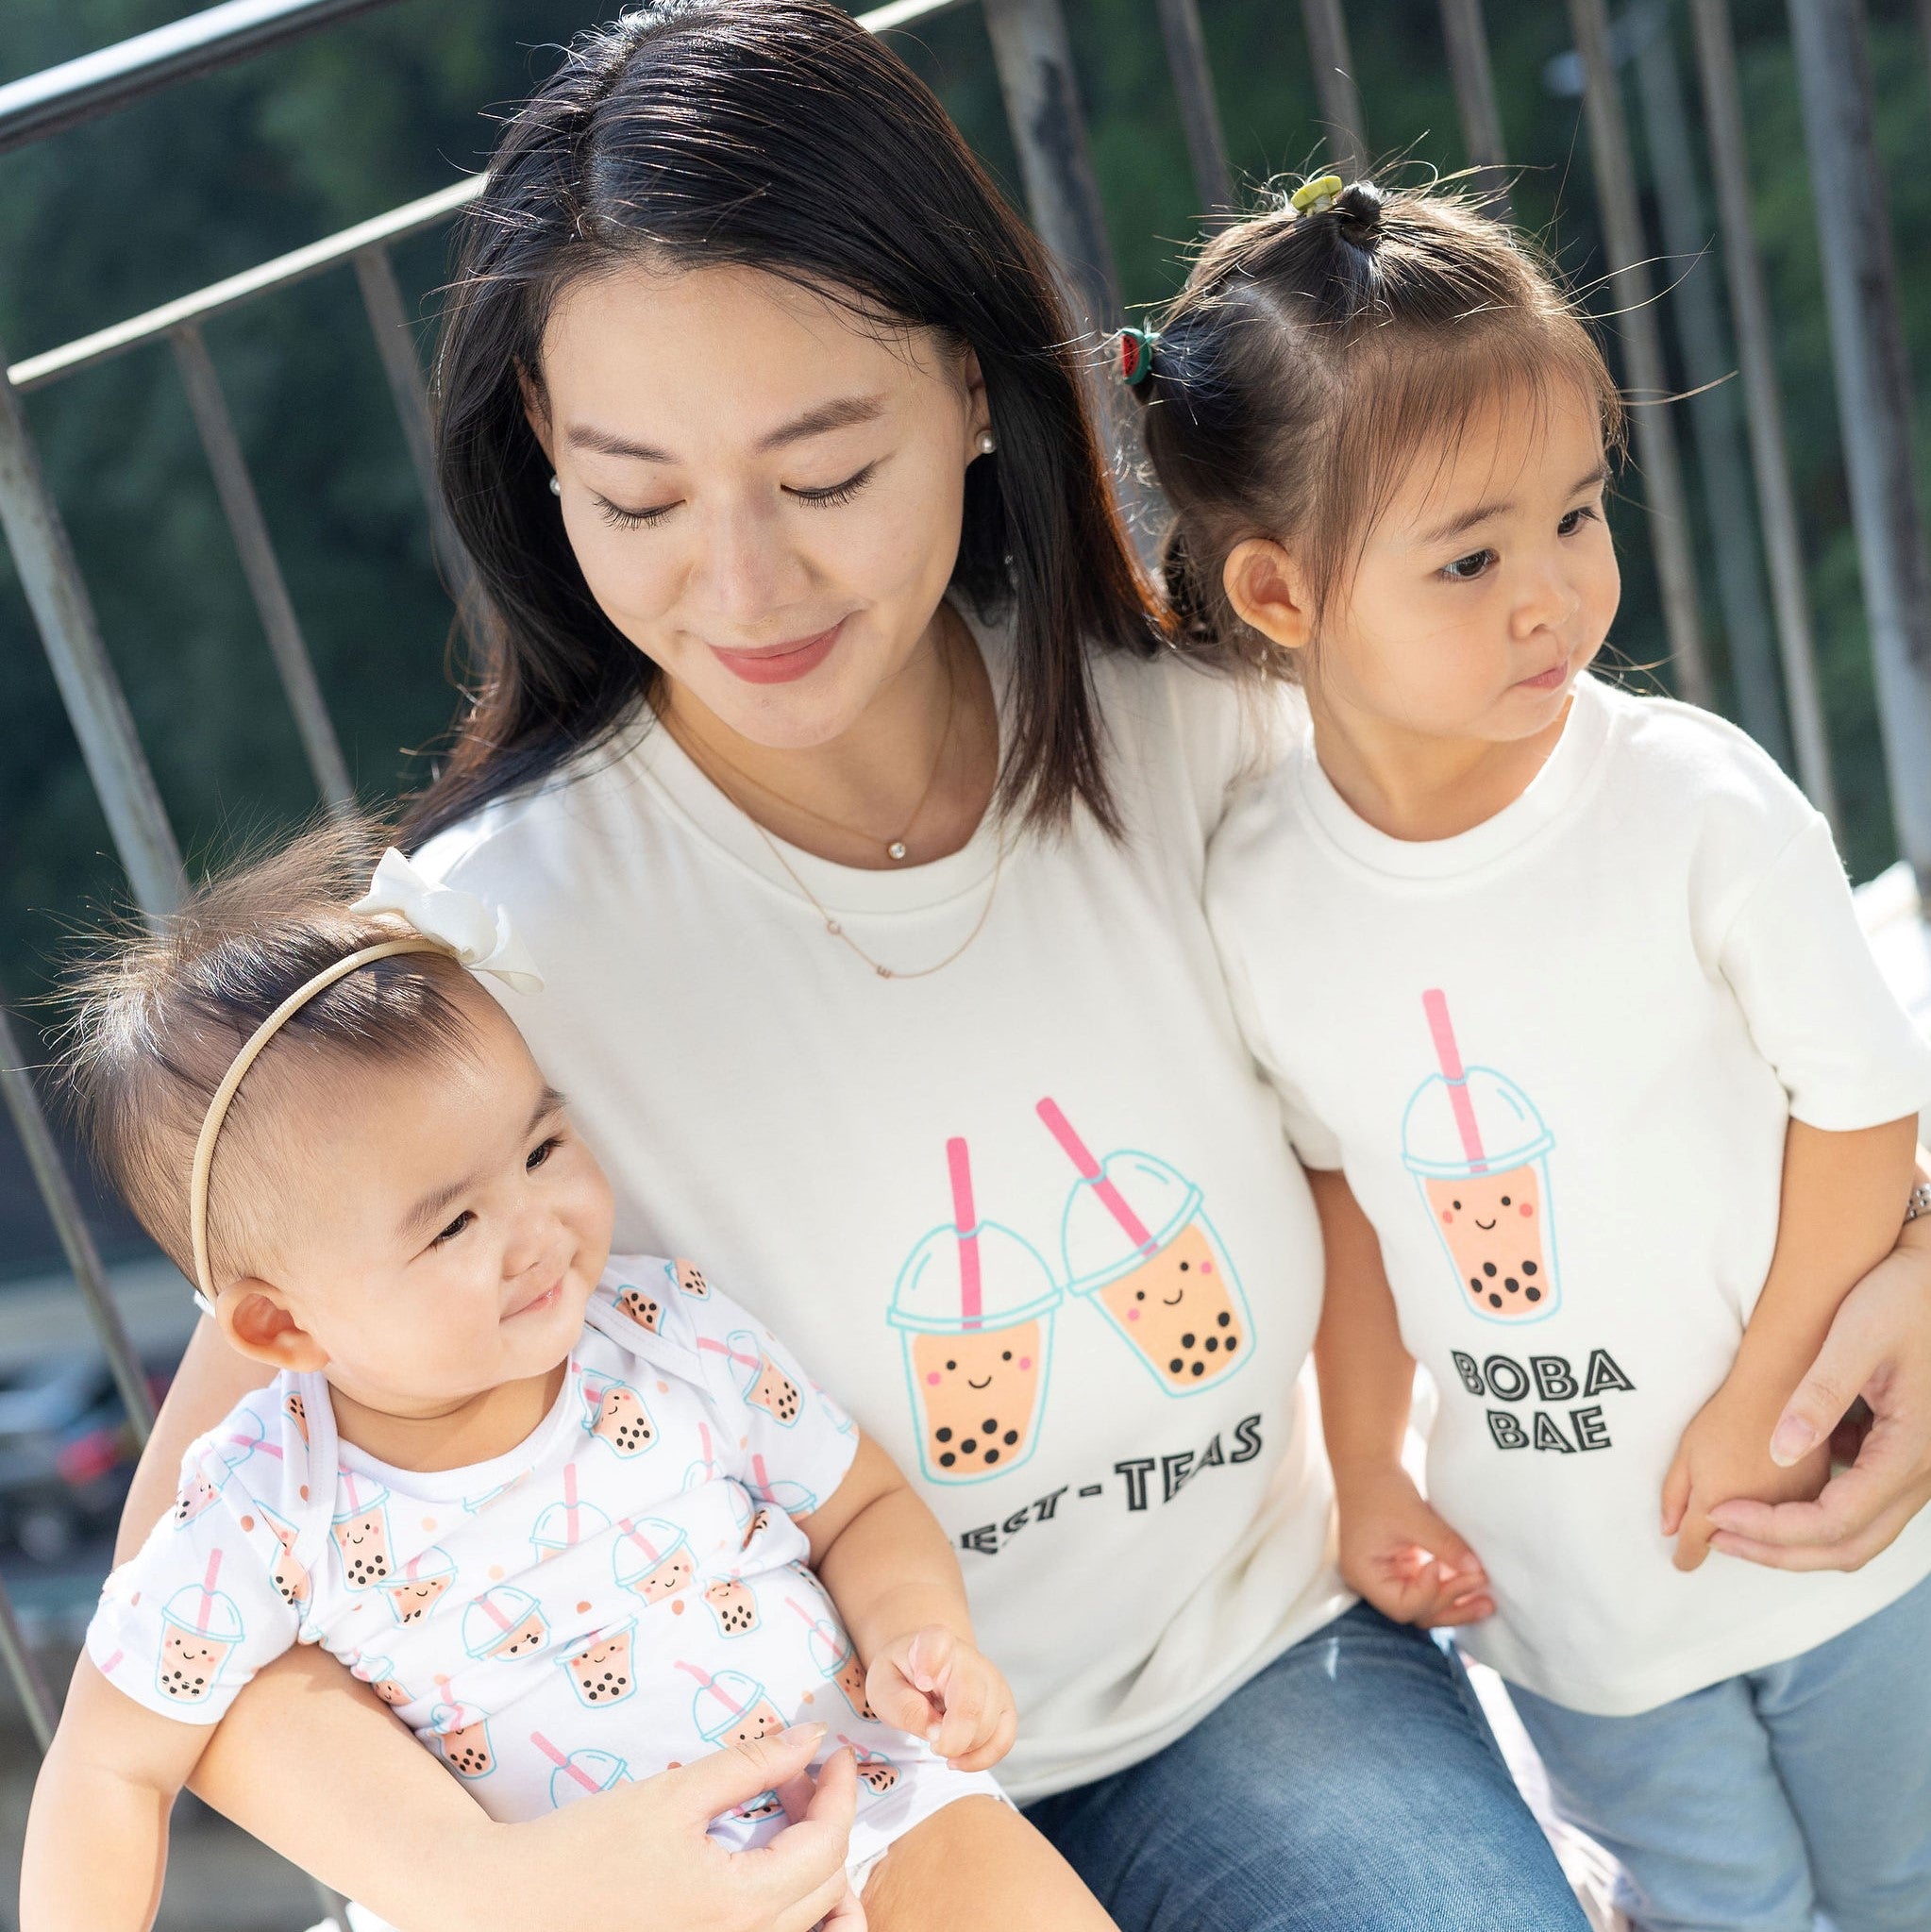 the wee bean mommy and me sibling matching tee t-shirts in boba